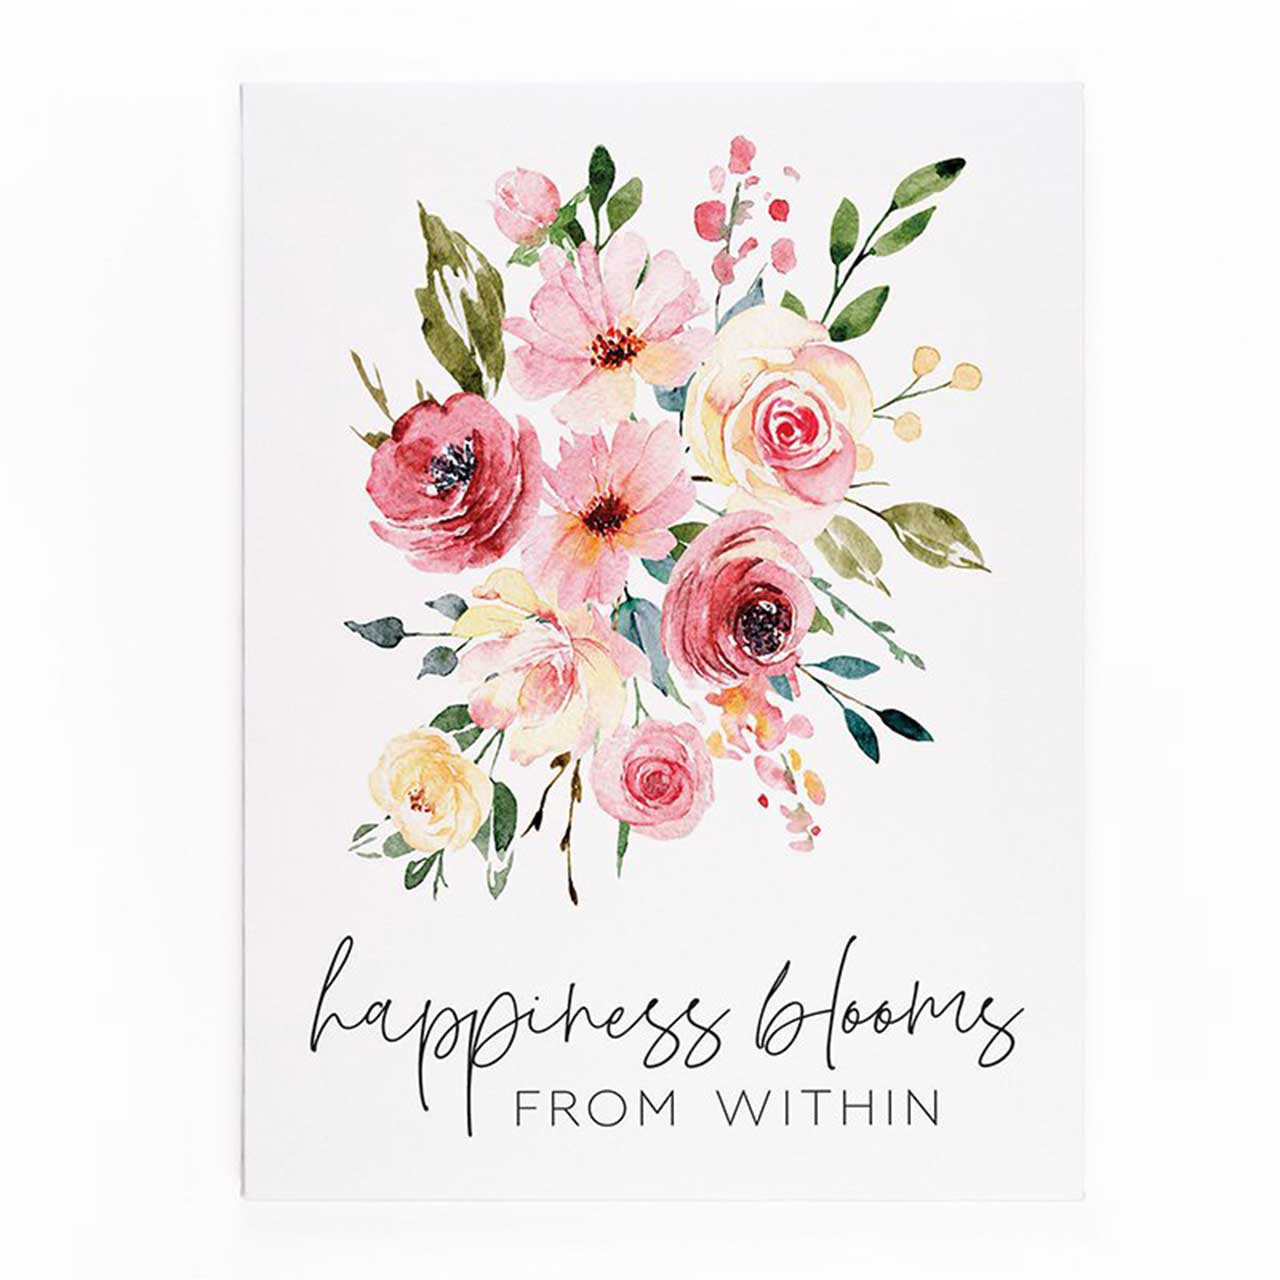 Happiness blooming Plaque 12x15.5